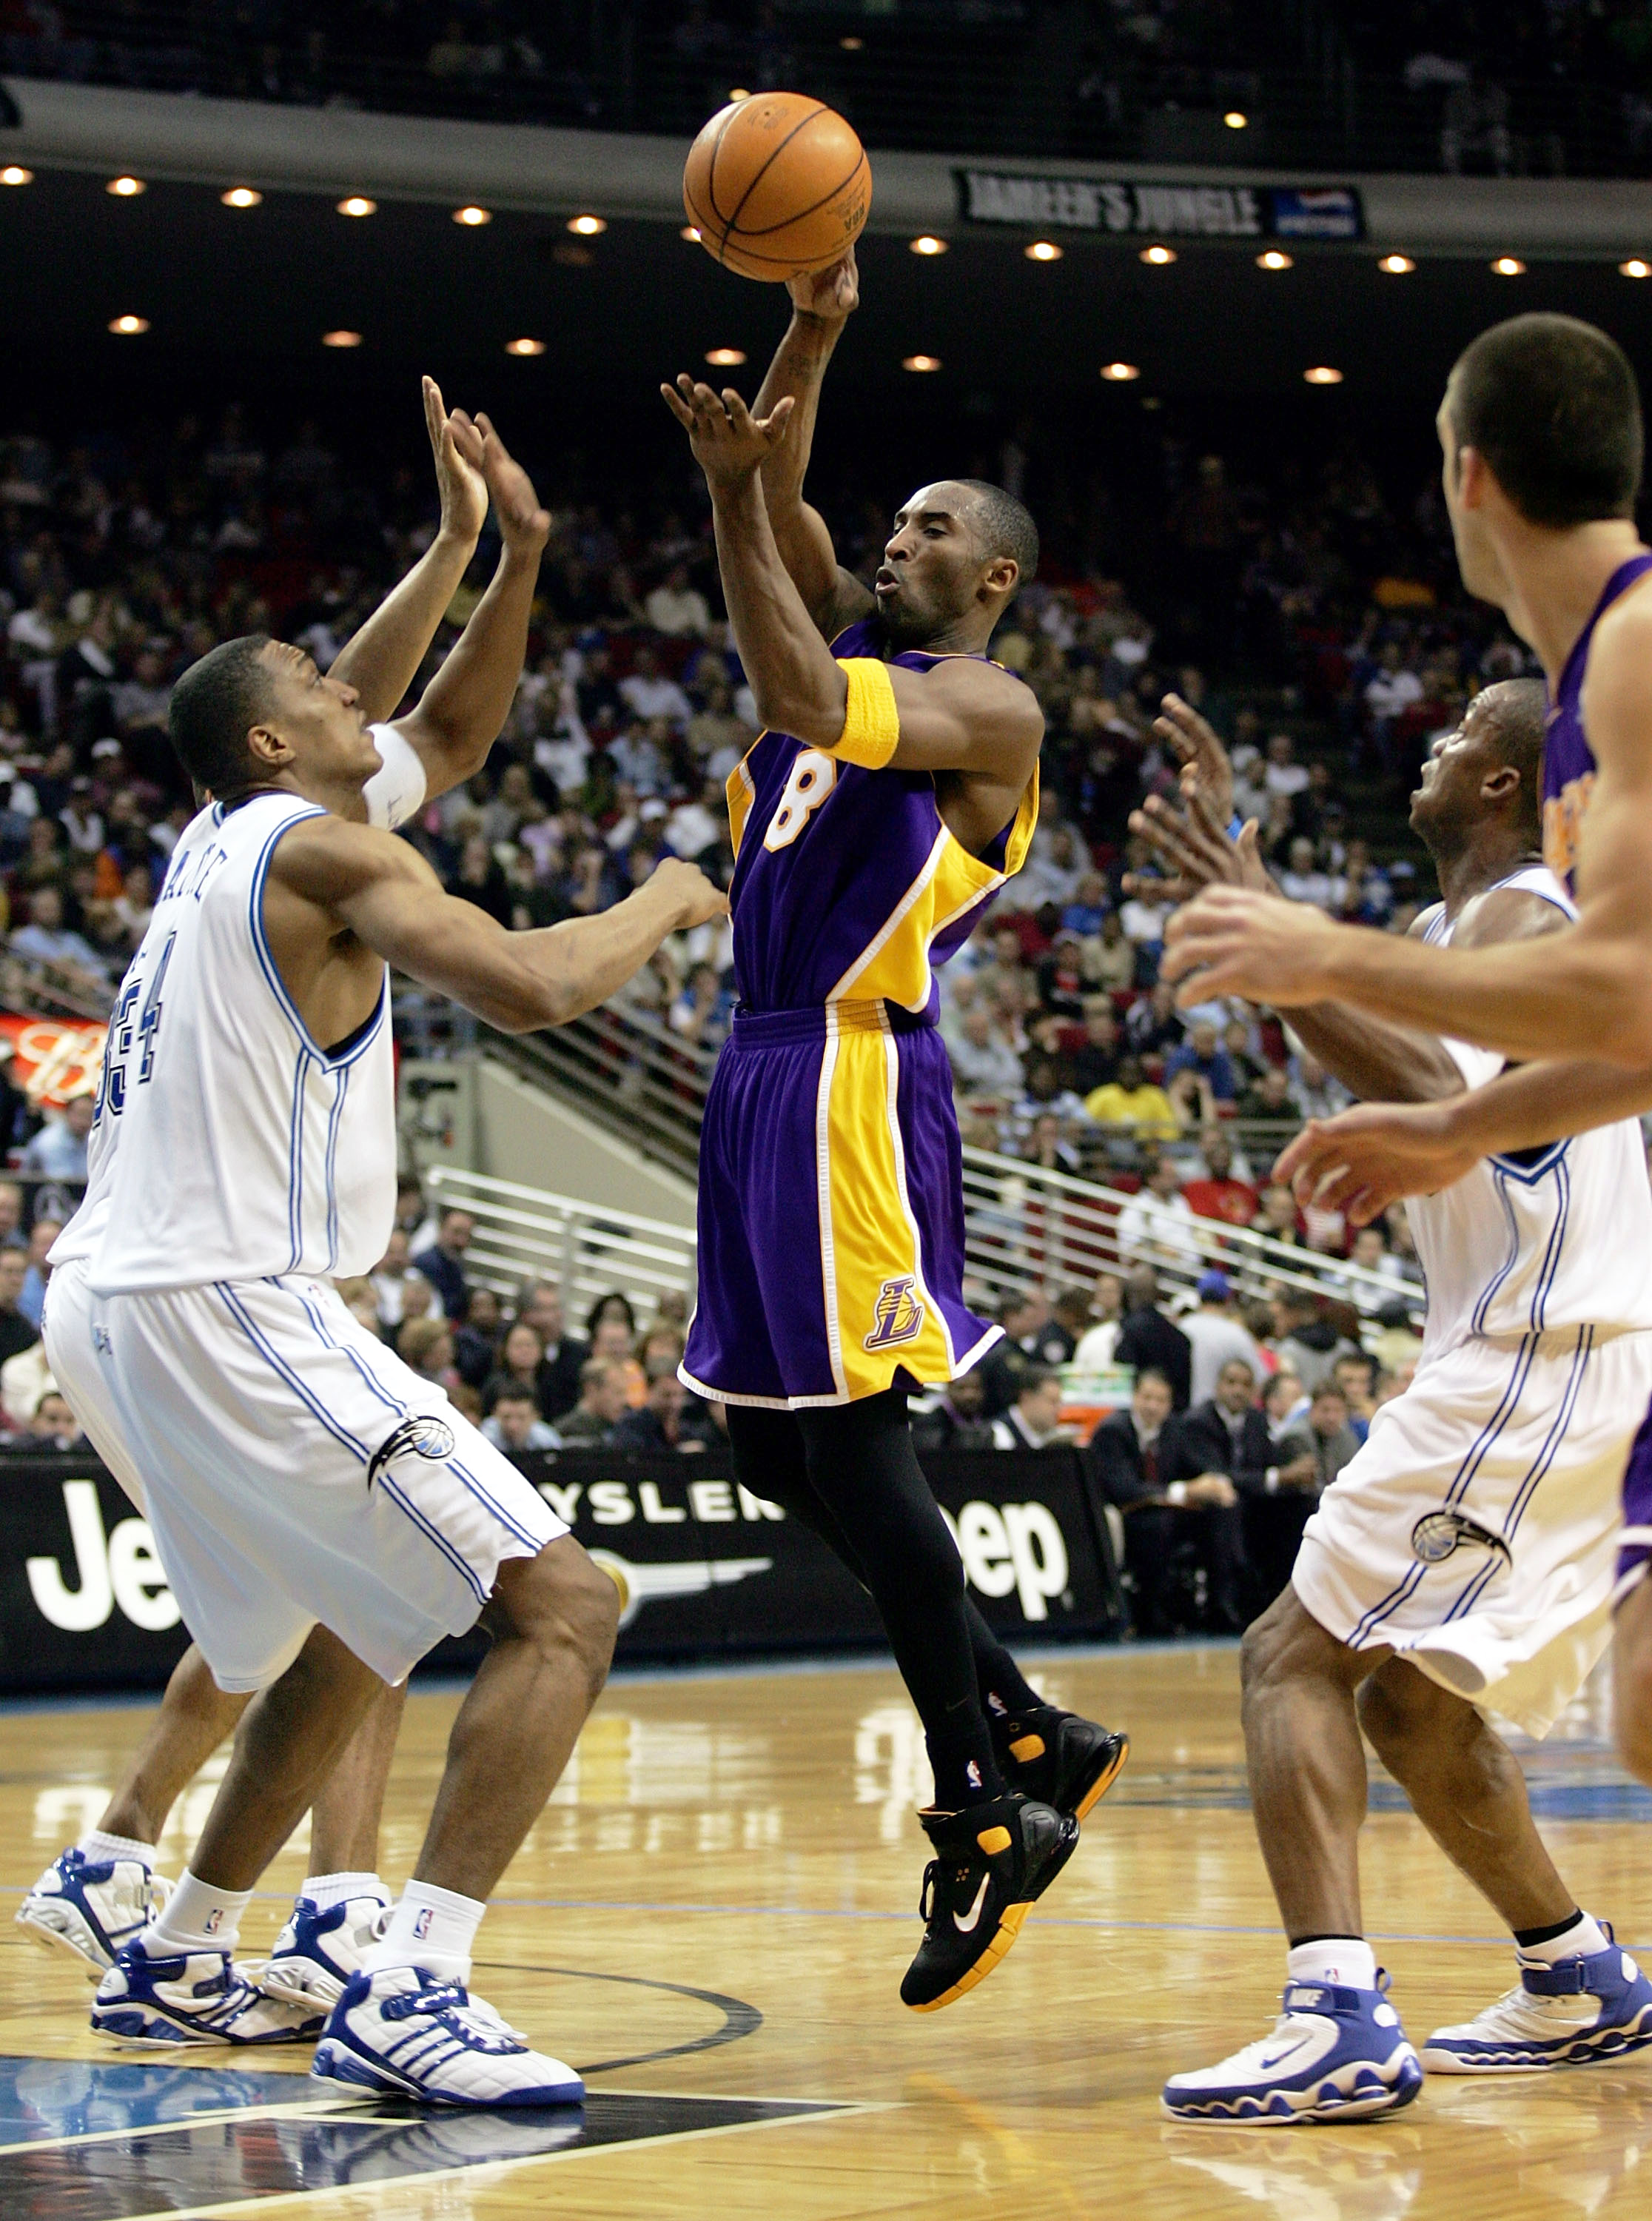 ORLANDO, FL - DECEMBER 23:  Kobe Bryant #8 of the Los Angeles Lakers makes a no-look pass against Tony Battie #4 (L) of the Orlando Magic at the TD Waterhouse Centre on December 23, 2005 in Orlando, Florida.  NOTE TO USER: User expressly acknowledges and 